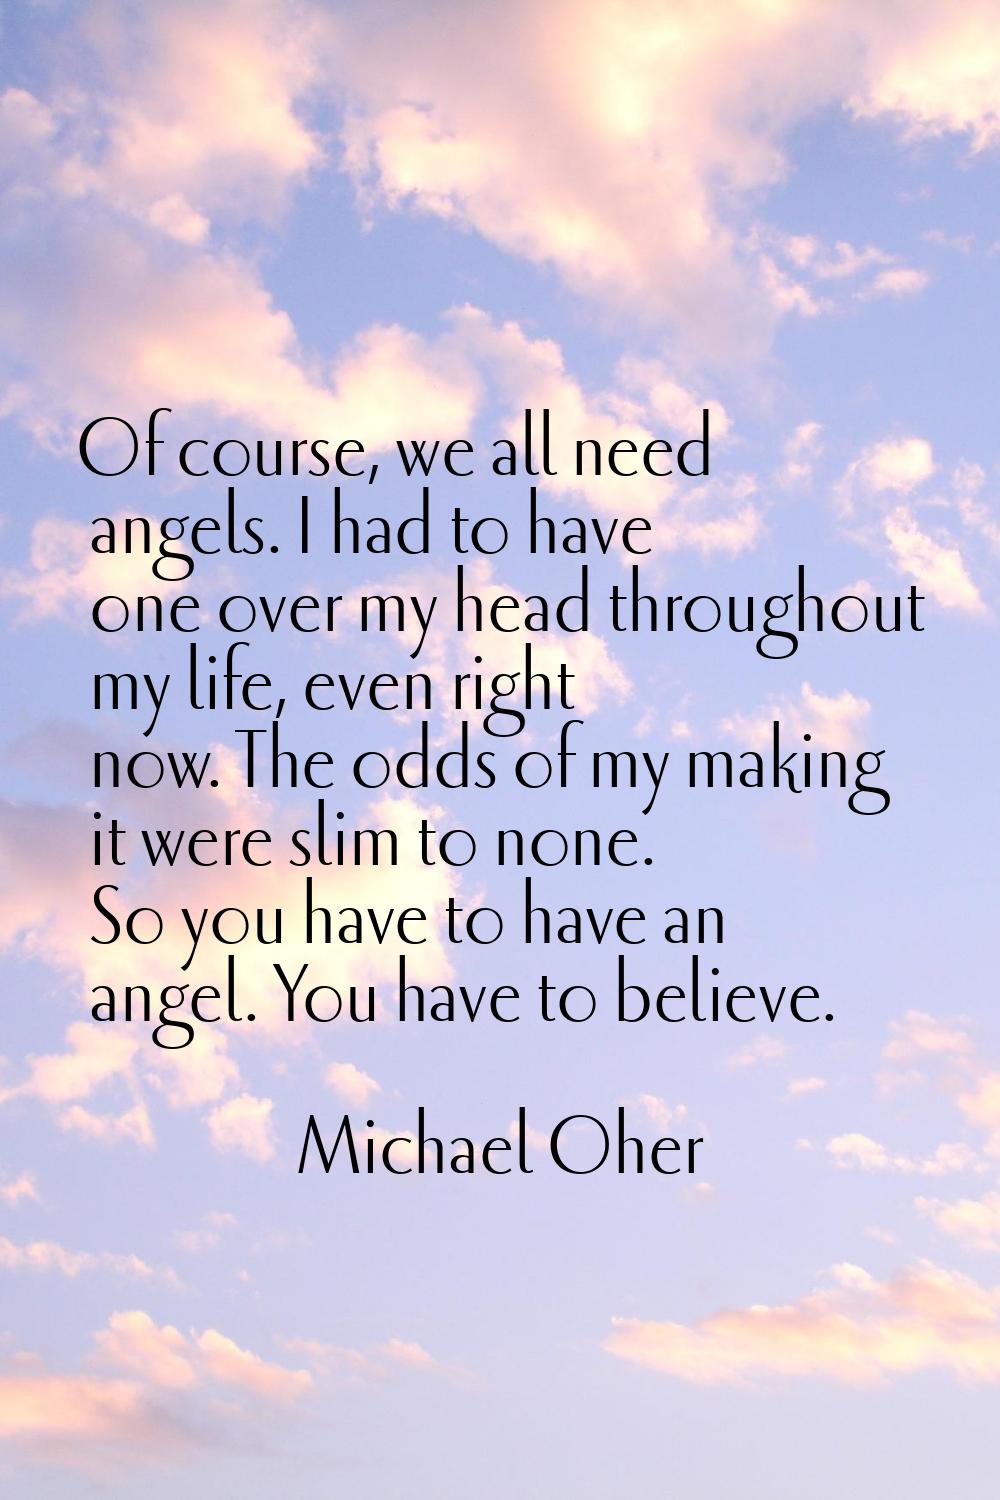 Of course, we all need angels. I had to have one over my head throughout my life, even right now. T